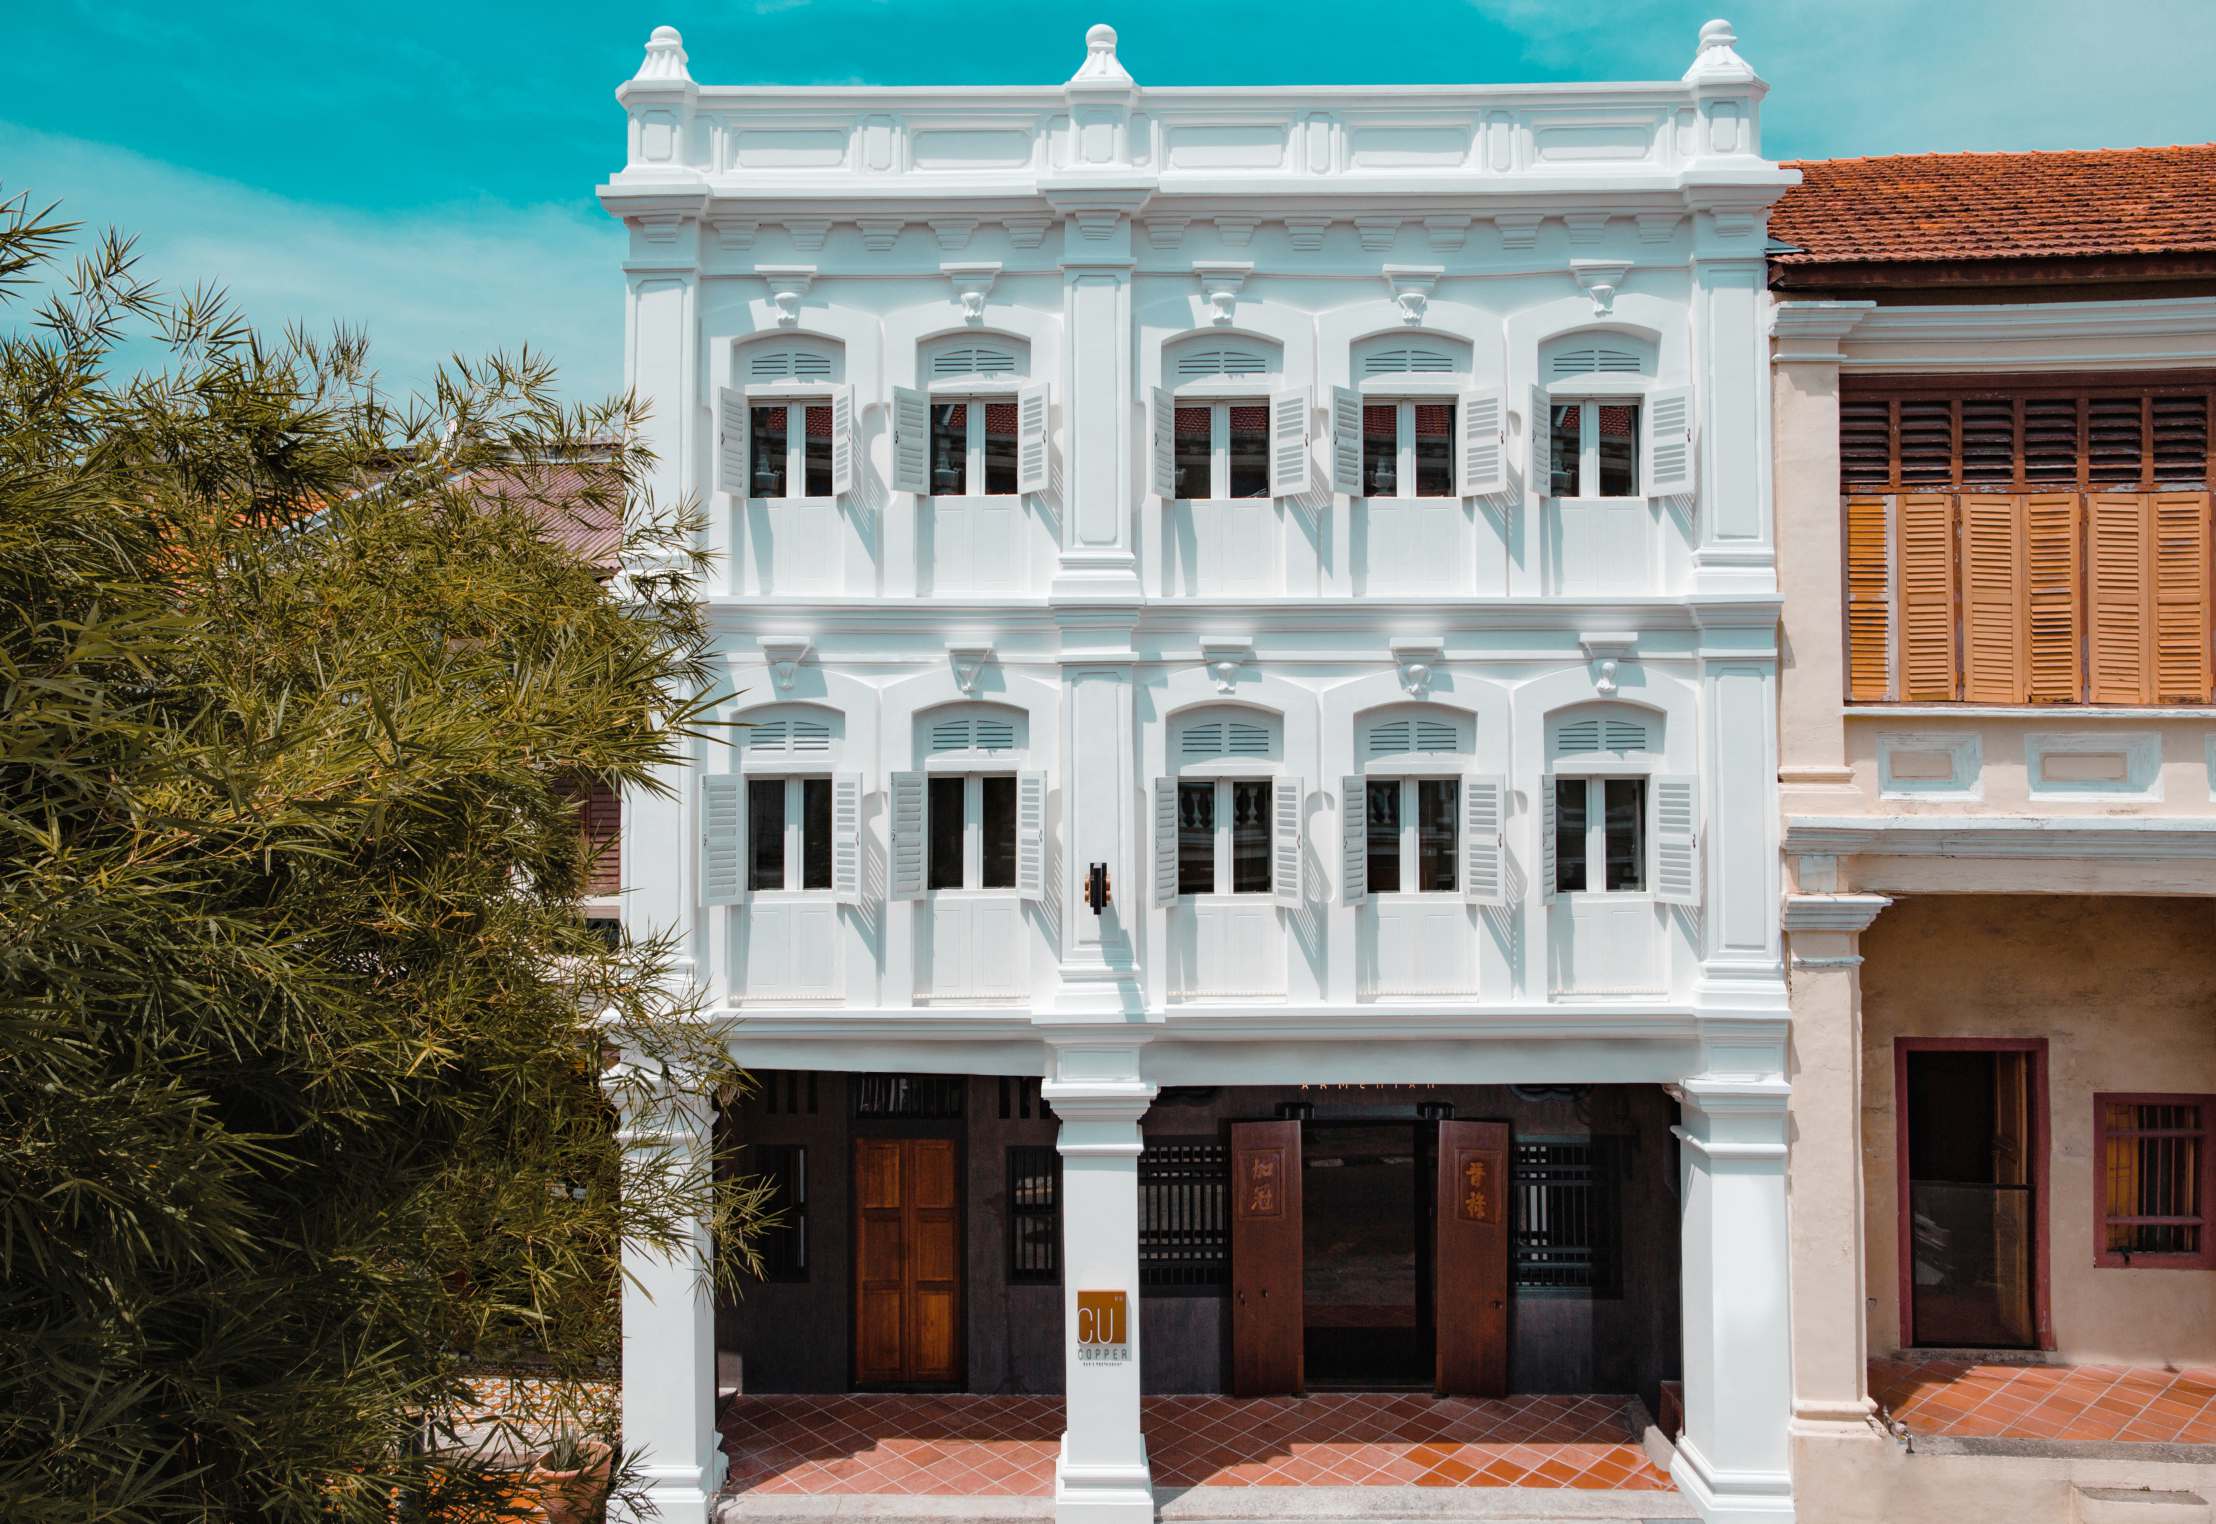 First look: Penang’s latest luxury boutique hotel 88 Armenian stays true to its colonial past